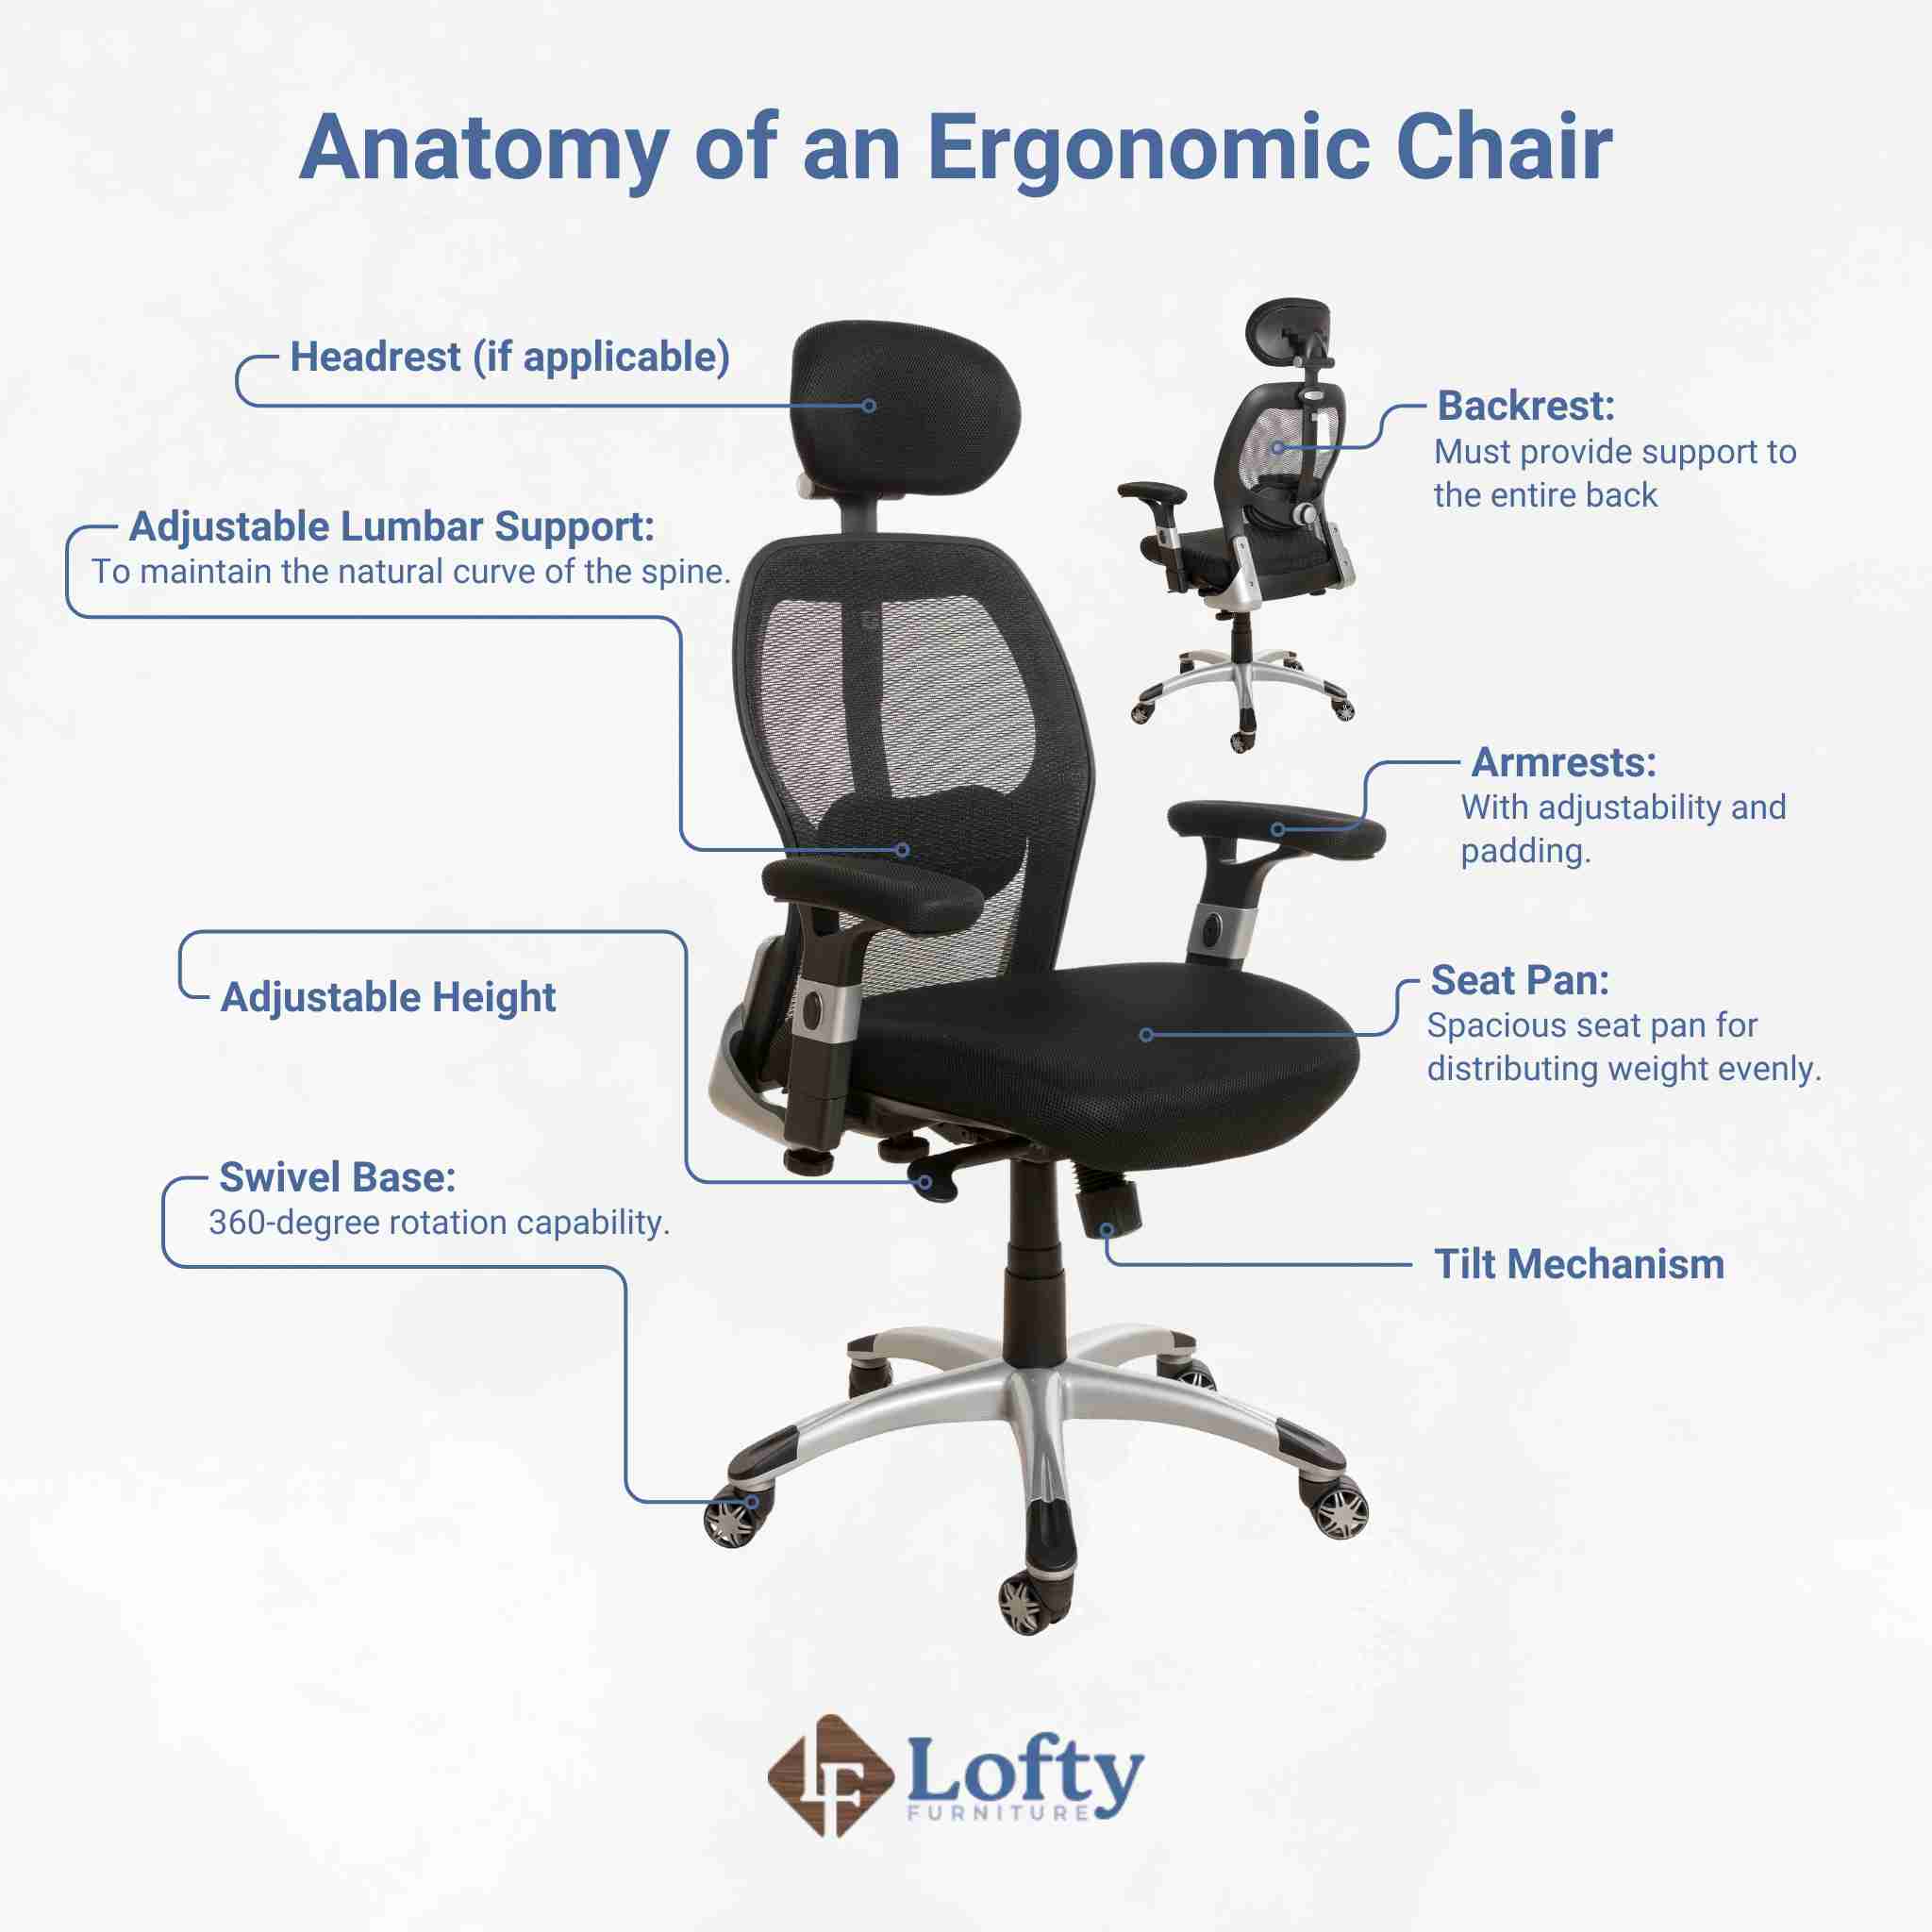 A graphic illustration of the anatomy of an ergonomic chair